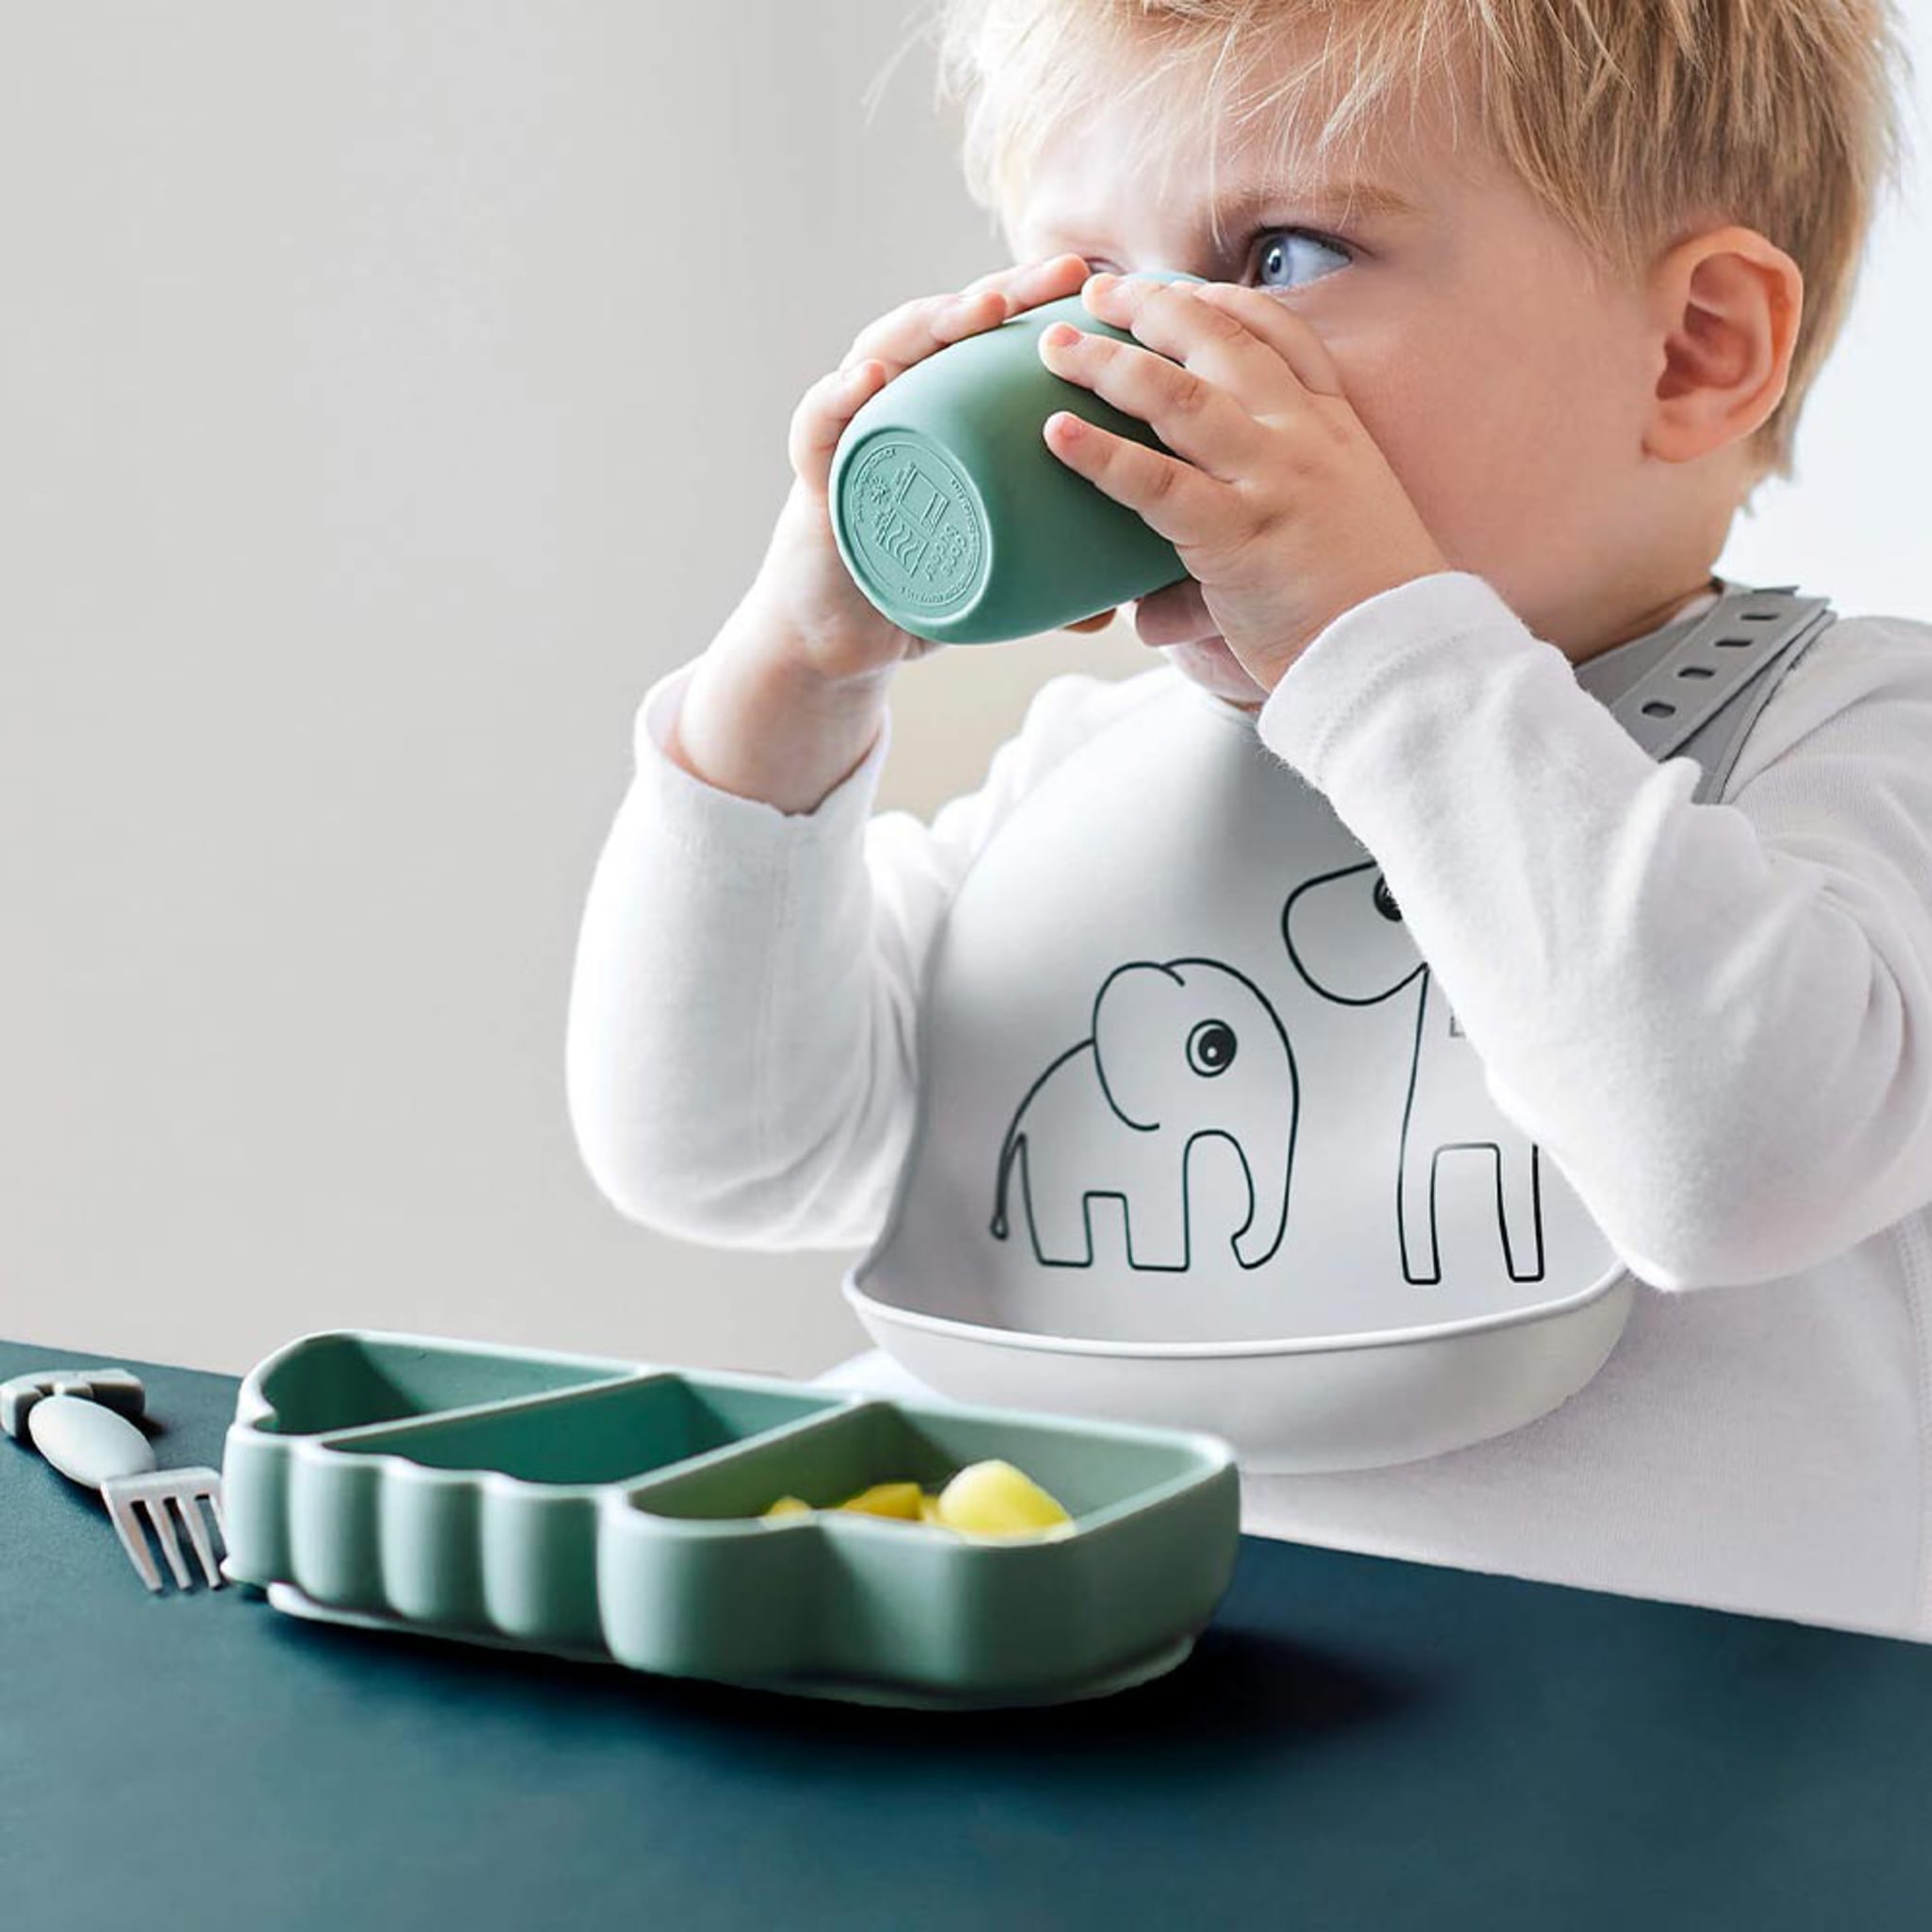 Silicone Stick&Stay snackplate Croco Green, Green